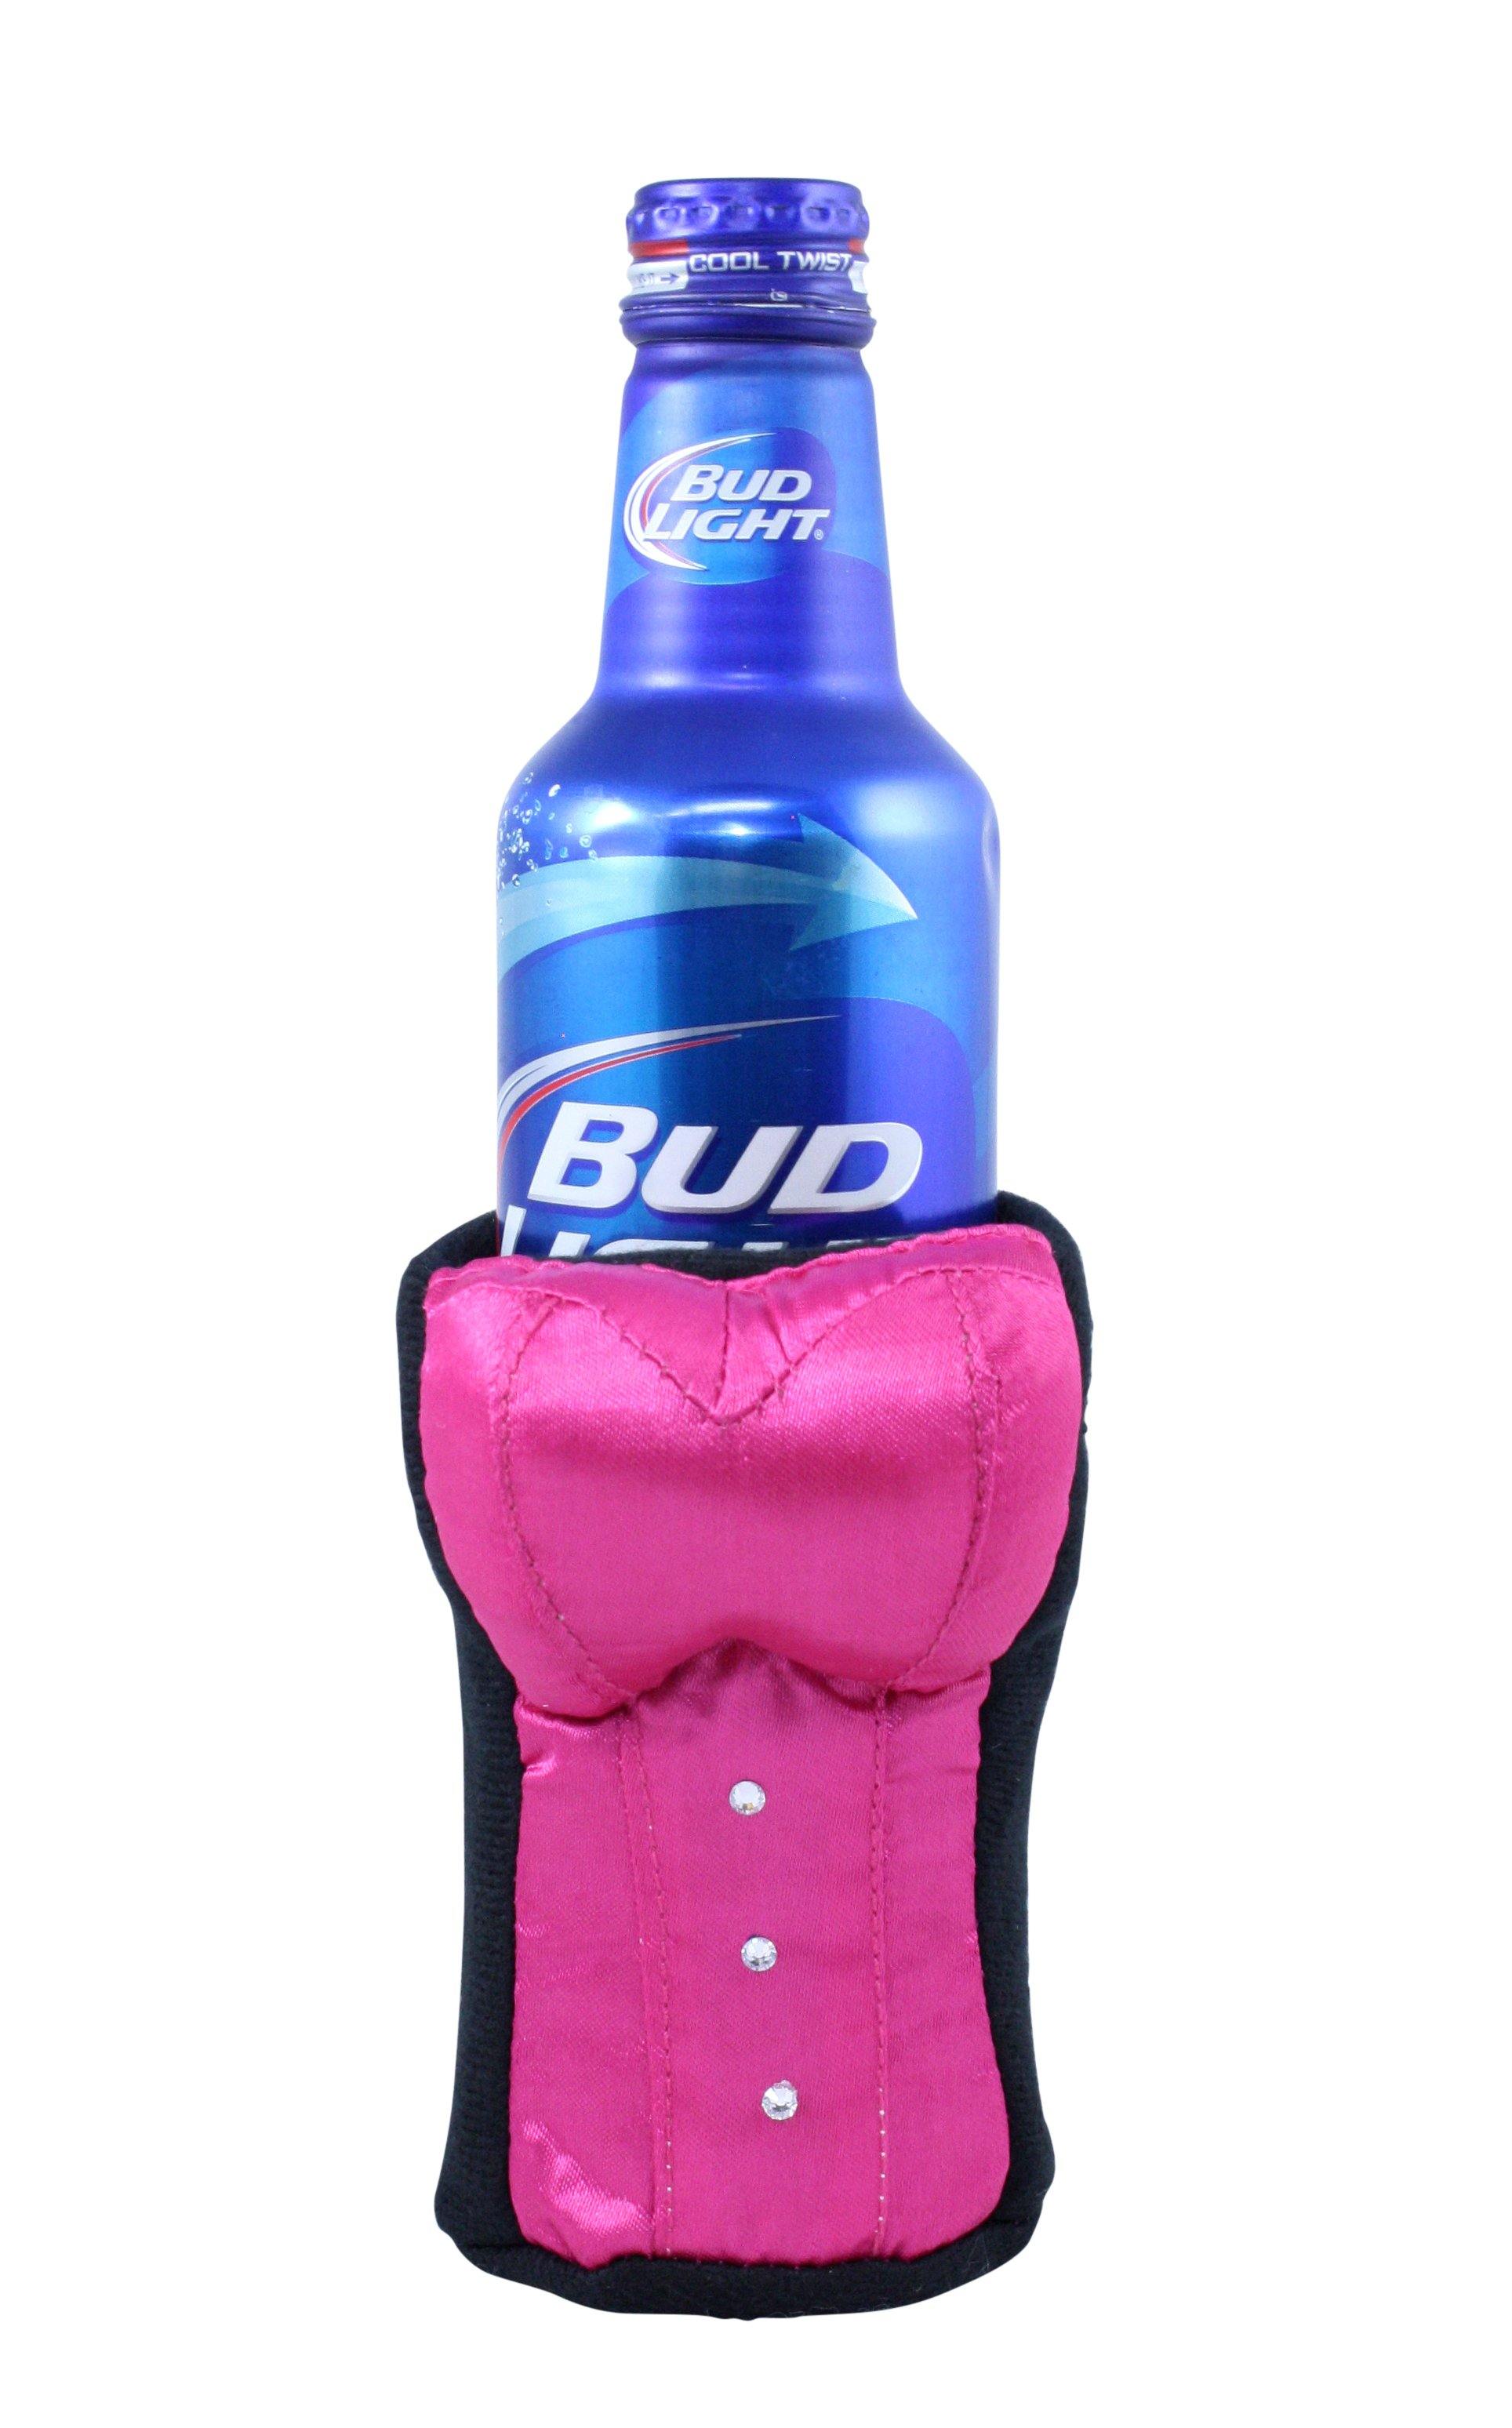 Festival Beer Koozie - holds Concert Size 20oz Beers - by Tipsy Totes